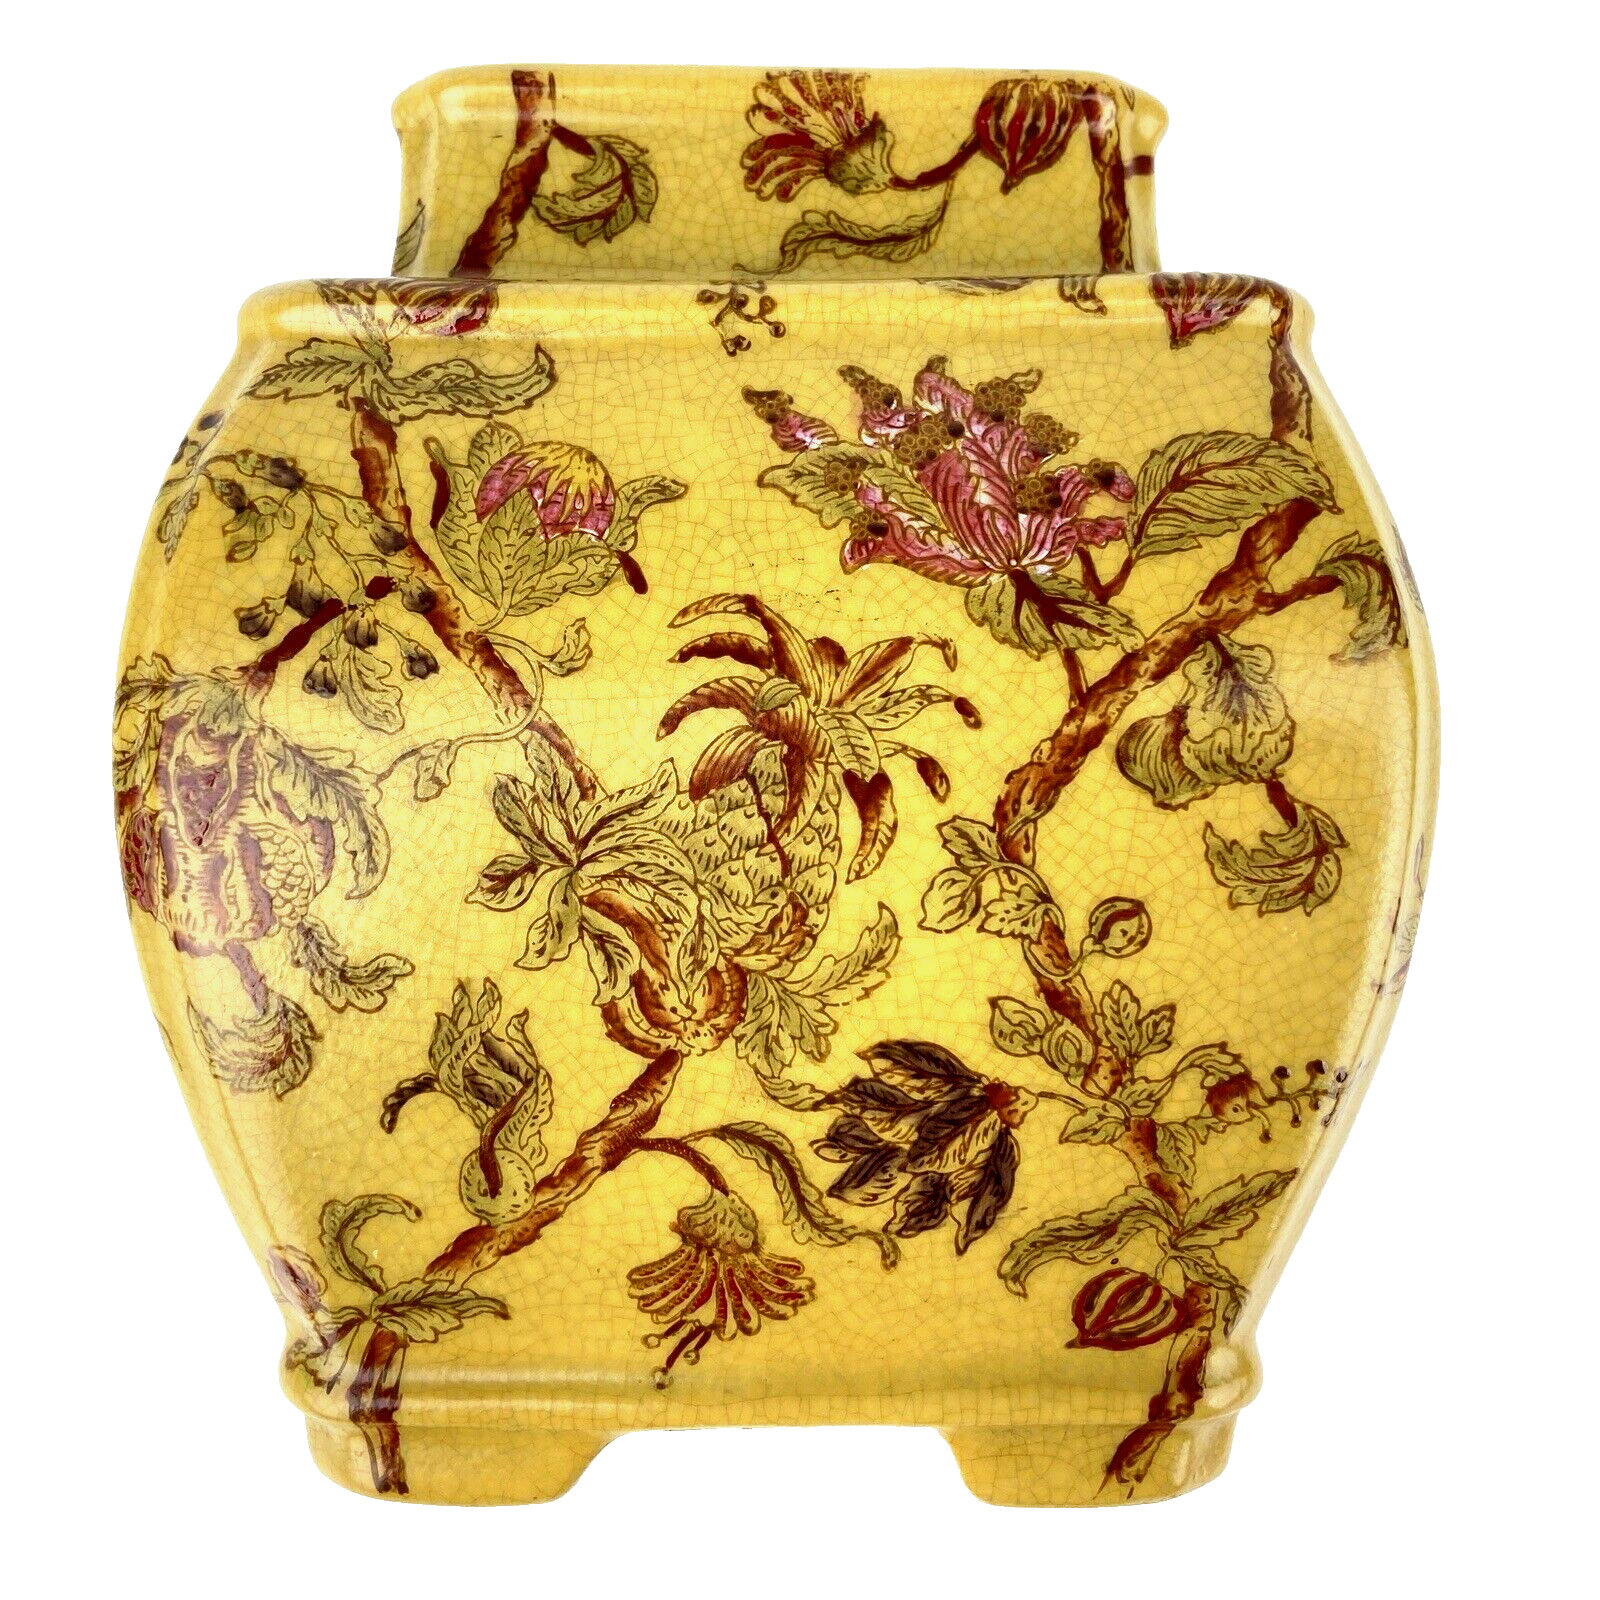 Mark Robert’s Porcelain Jar Yellow With Red Floral Design Vintage Chinese